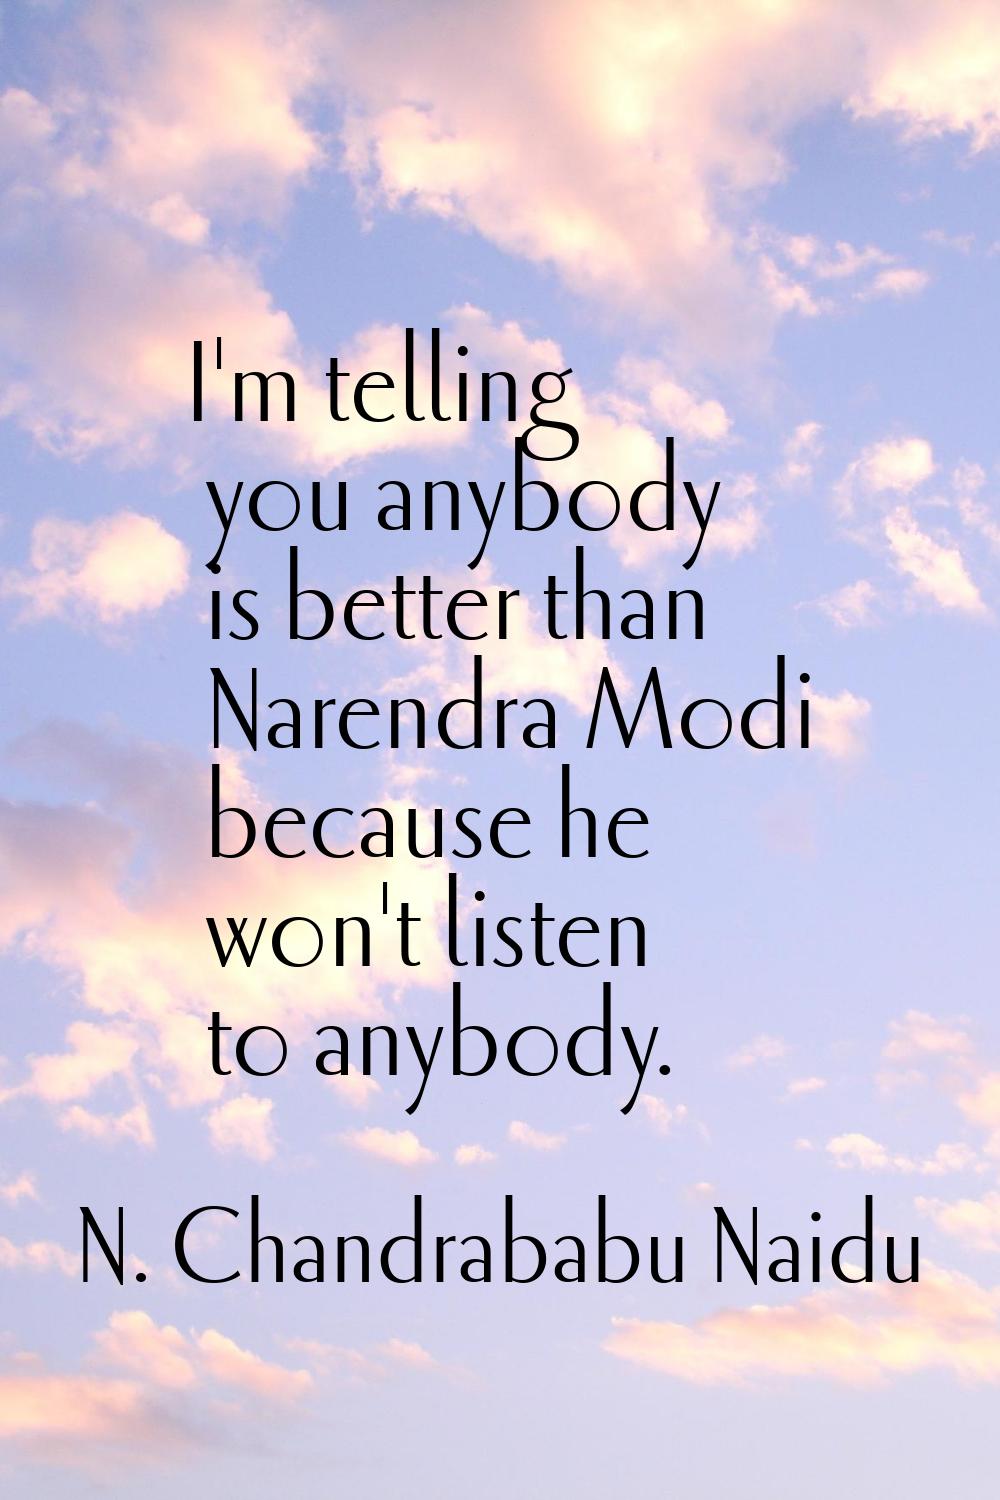 I'm telling you anybody is better than Narendra Modi because he won't listen to anybody.